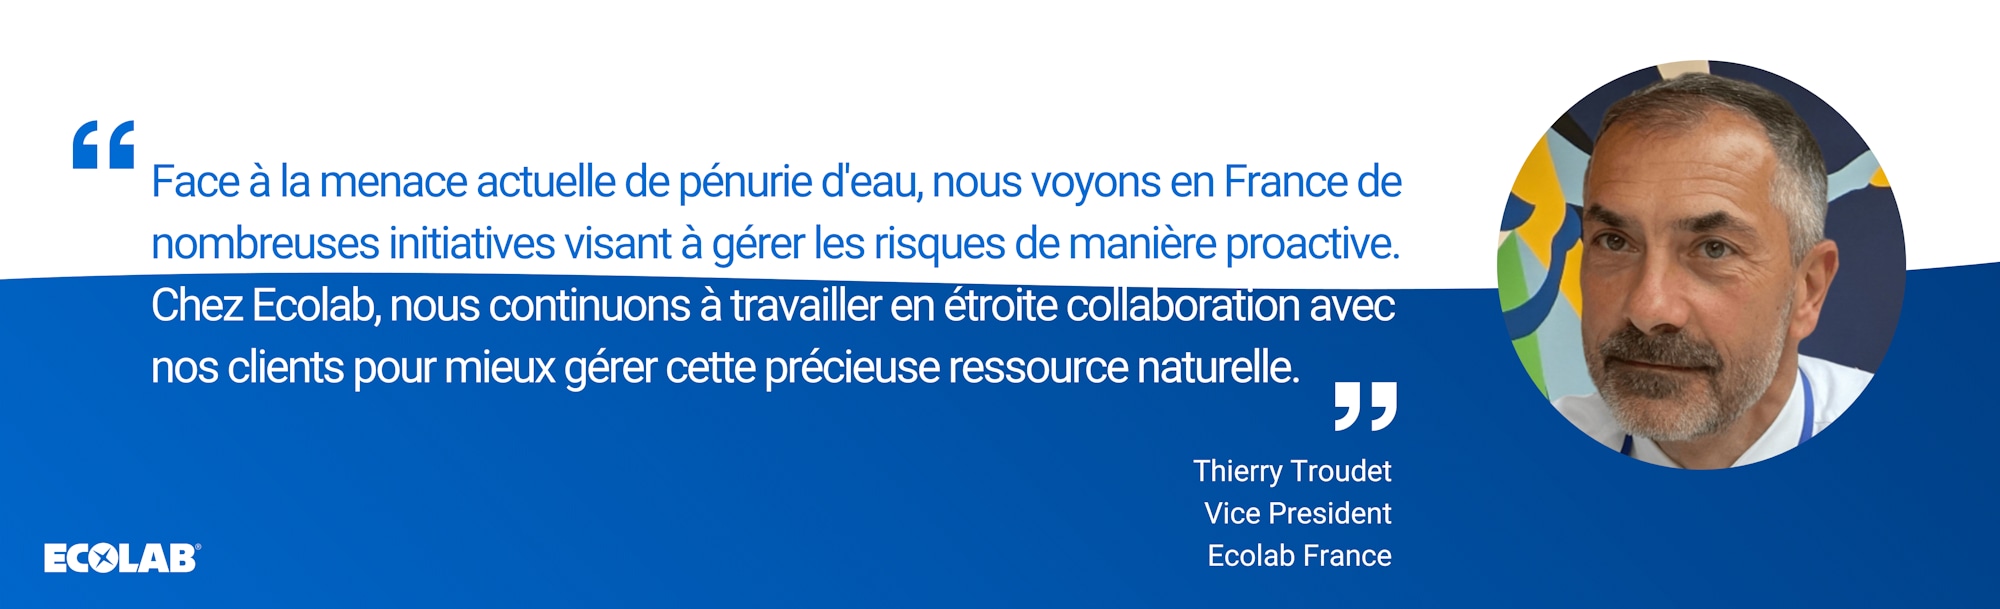 thierry troudet quote and carousel